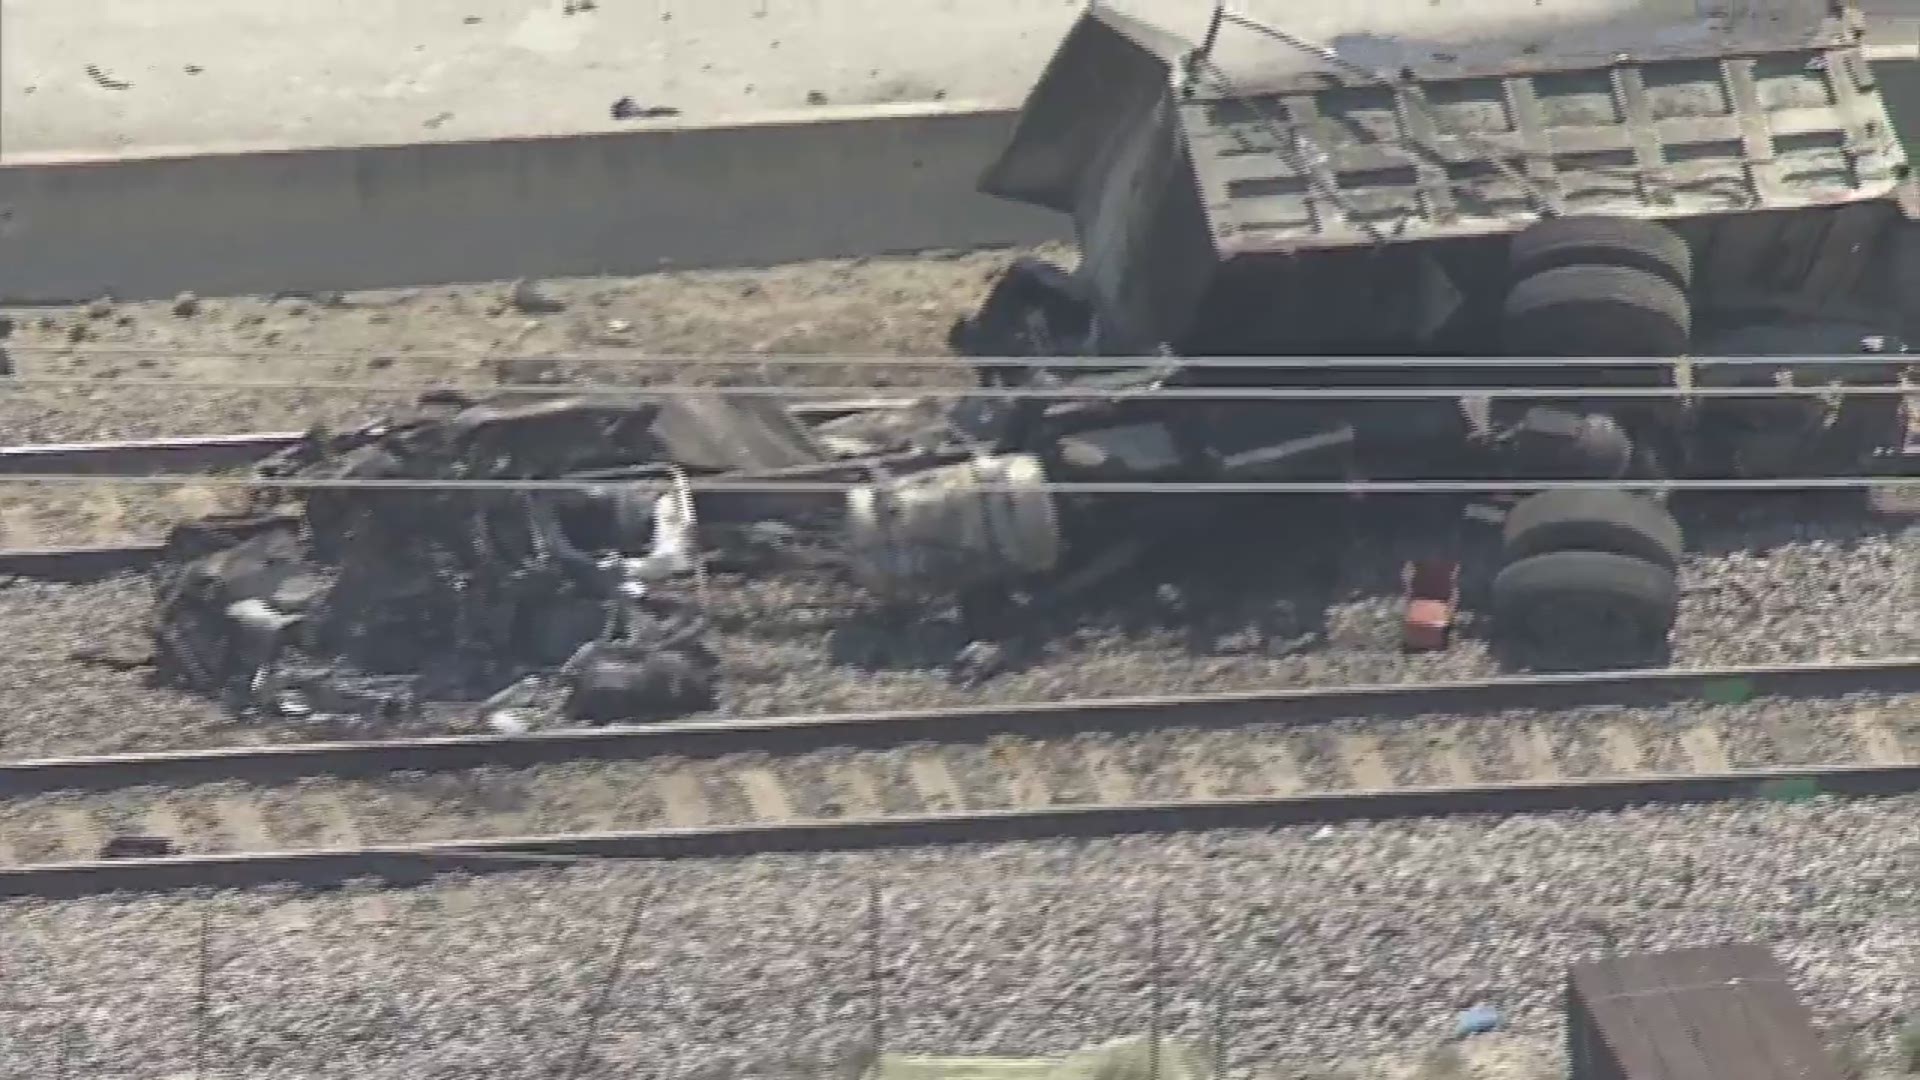 2 people in the truck were killed and several people on the train were seriously injured.